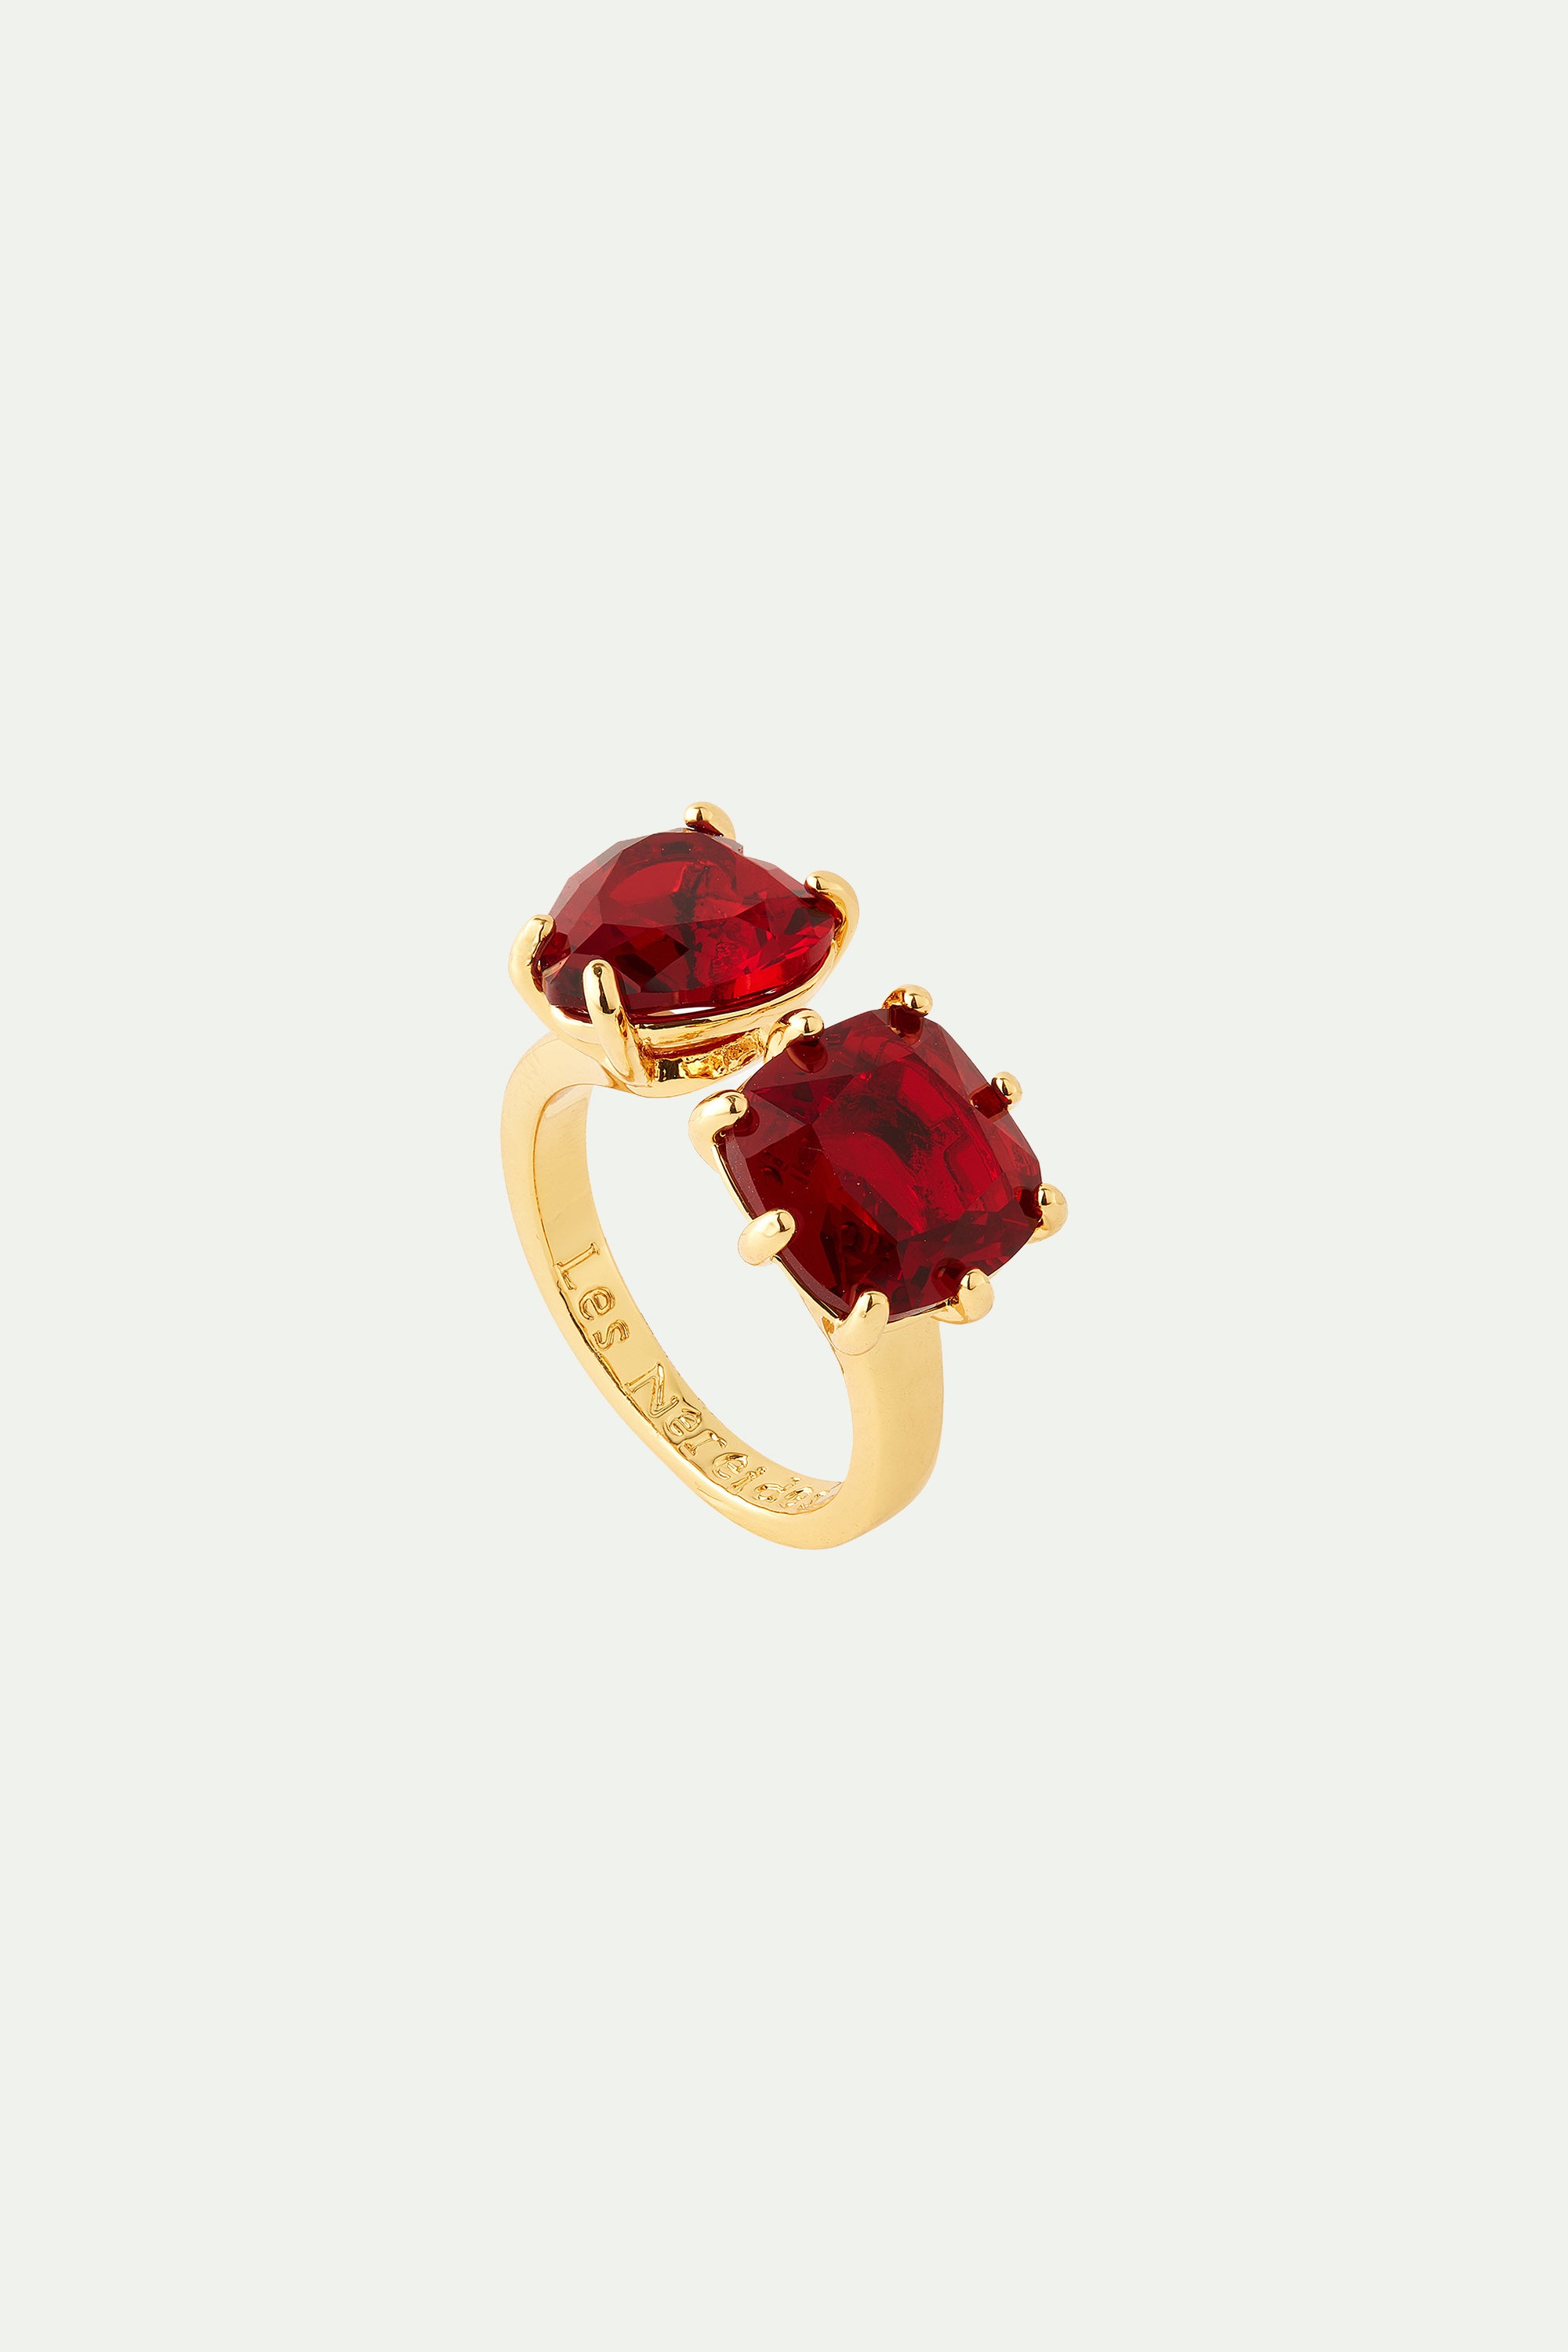 Garnet red diamantine heart and square stone You and me adjustable ring